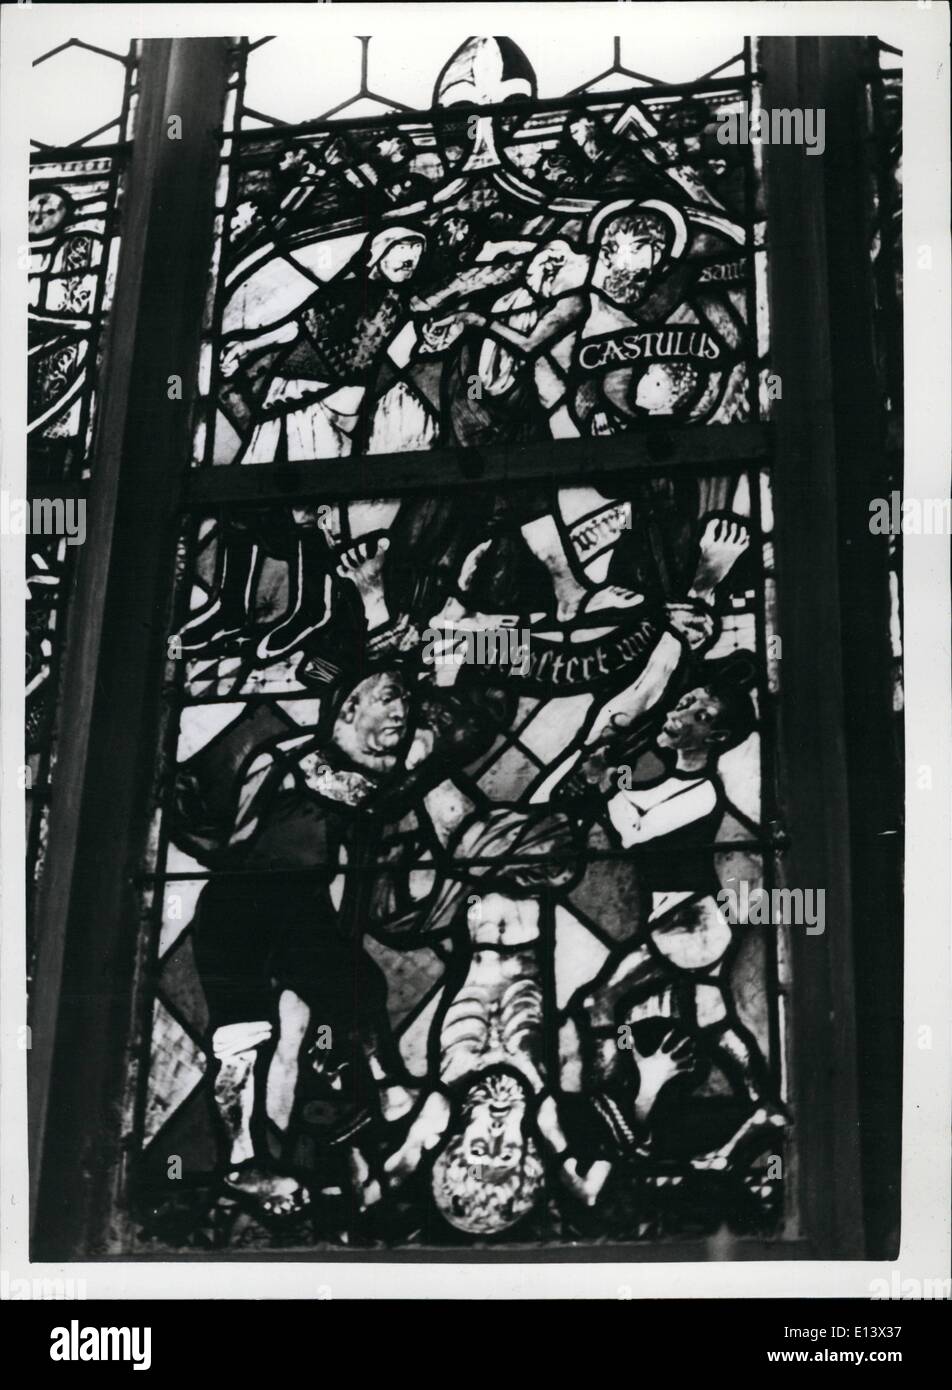 Mar. 27, 2012 - Nazi Leaders As Tortuteres - In Stained Glass Window: The Munich painter Karl Lacher has produced a unique stained glass window for the Labndshut Matinmuenster. The window symbolises the martydom of St. Kastulus,. The torturers bear the futures of Hitler (top-left); Gorring (below-left) and Goebbels. Karl; Lacher produced this window originally in 1946 - he belonged to the resistance movement. Now that the restoration of the Martinsmeunster is complete - the window has been 're-discovered' Stock Photo